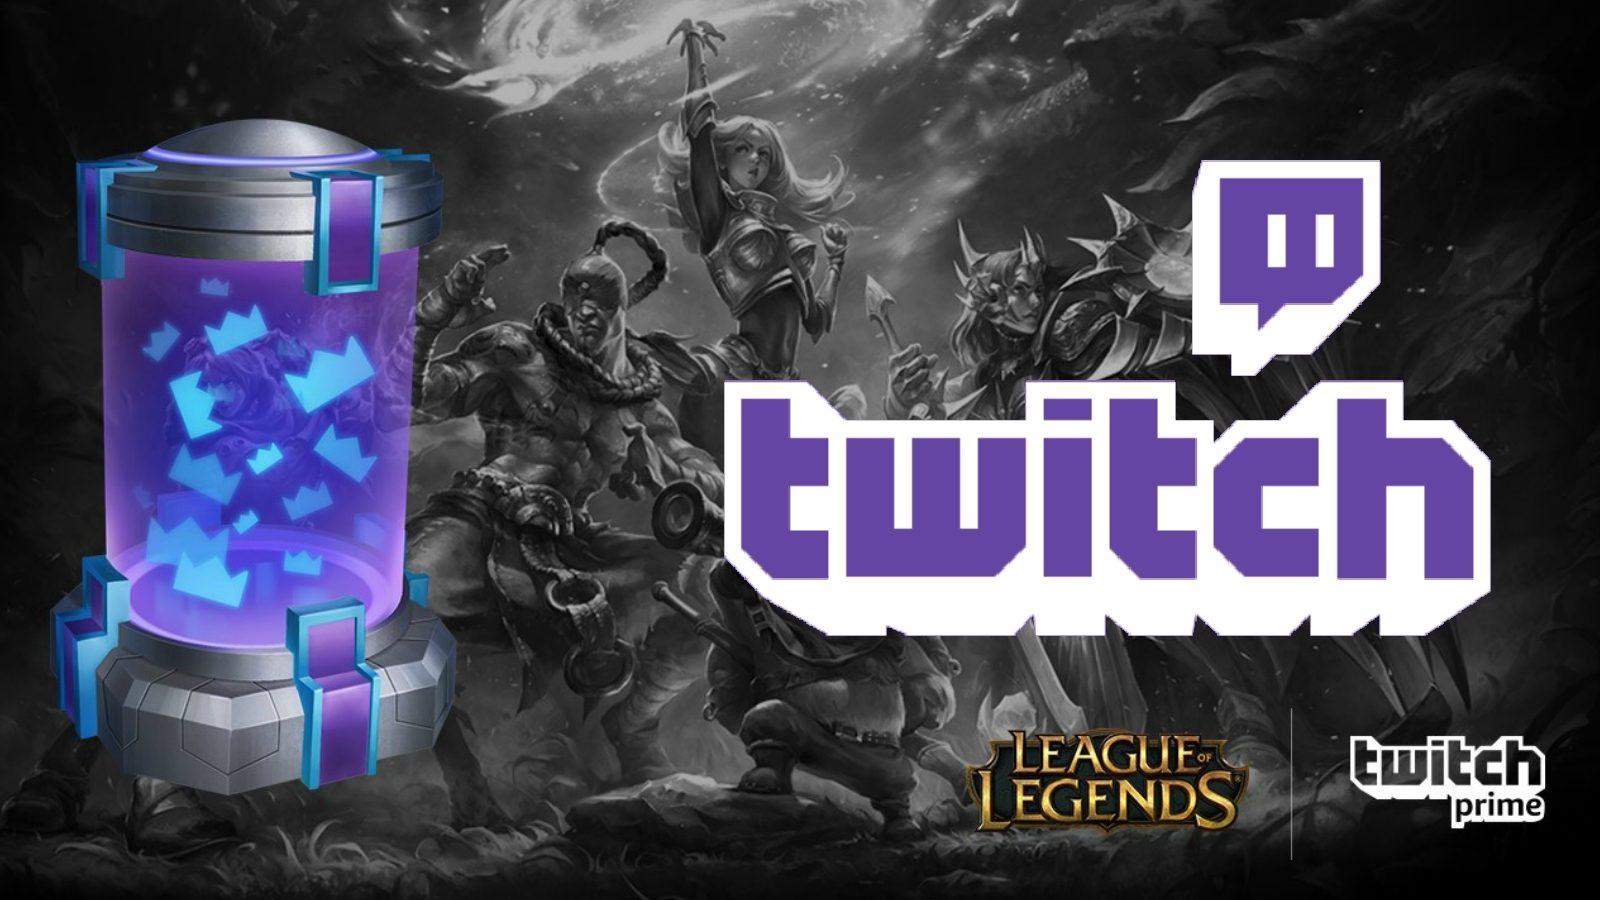 Claim Tons of League of Legends Loot Thanks to Twitch Prime Promotion